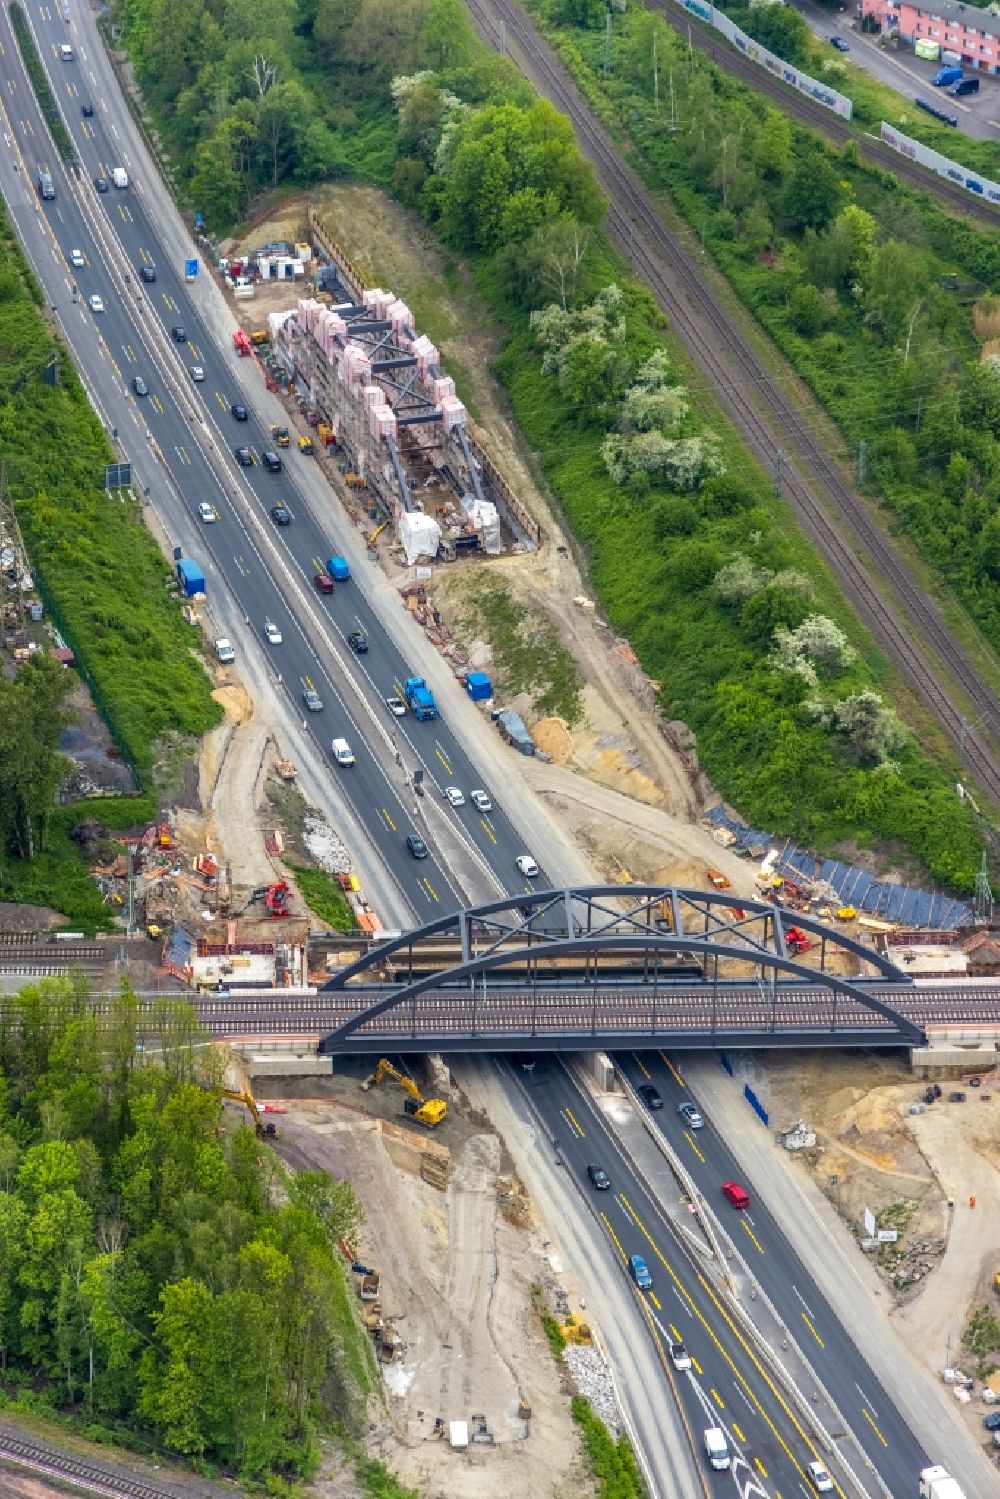 Aerial photograph Herne - Motorway junction Herne with construction site for the new routing in the course of the motorway tunnel construction at the junction Herne of the BAB 42 - 43 Tunnel Baukau in Herne in the federal state North Rhine-Westphalia, Germany